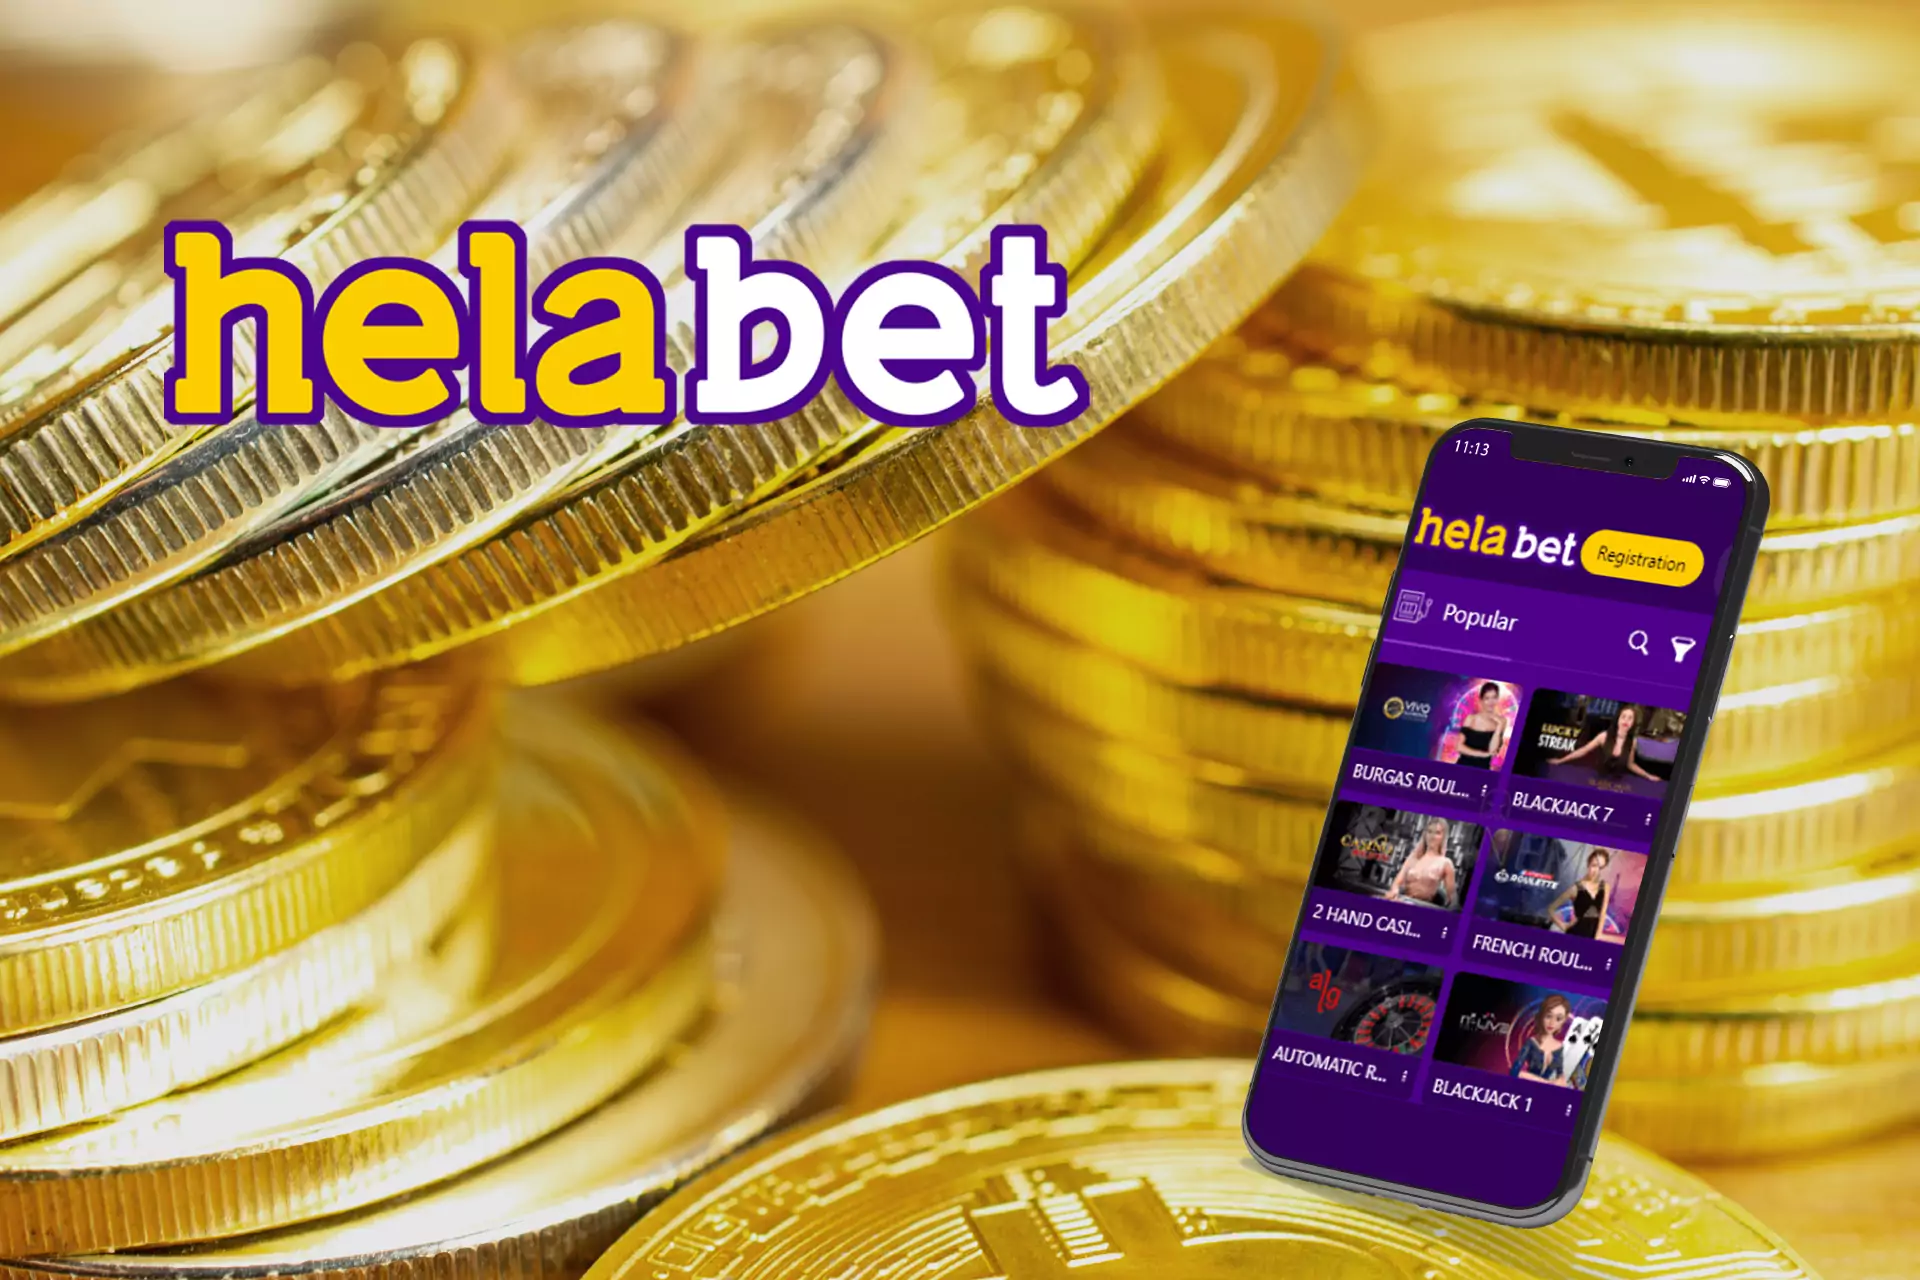 If 20 of your bets are lost within 30 days, Helabet will refund some of the money.